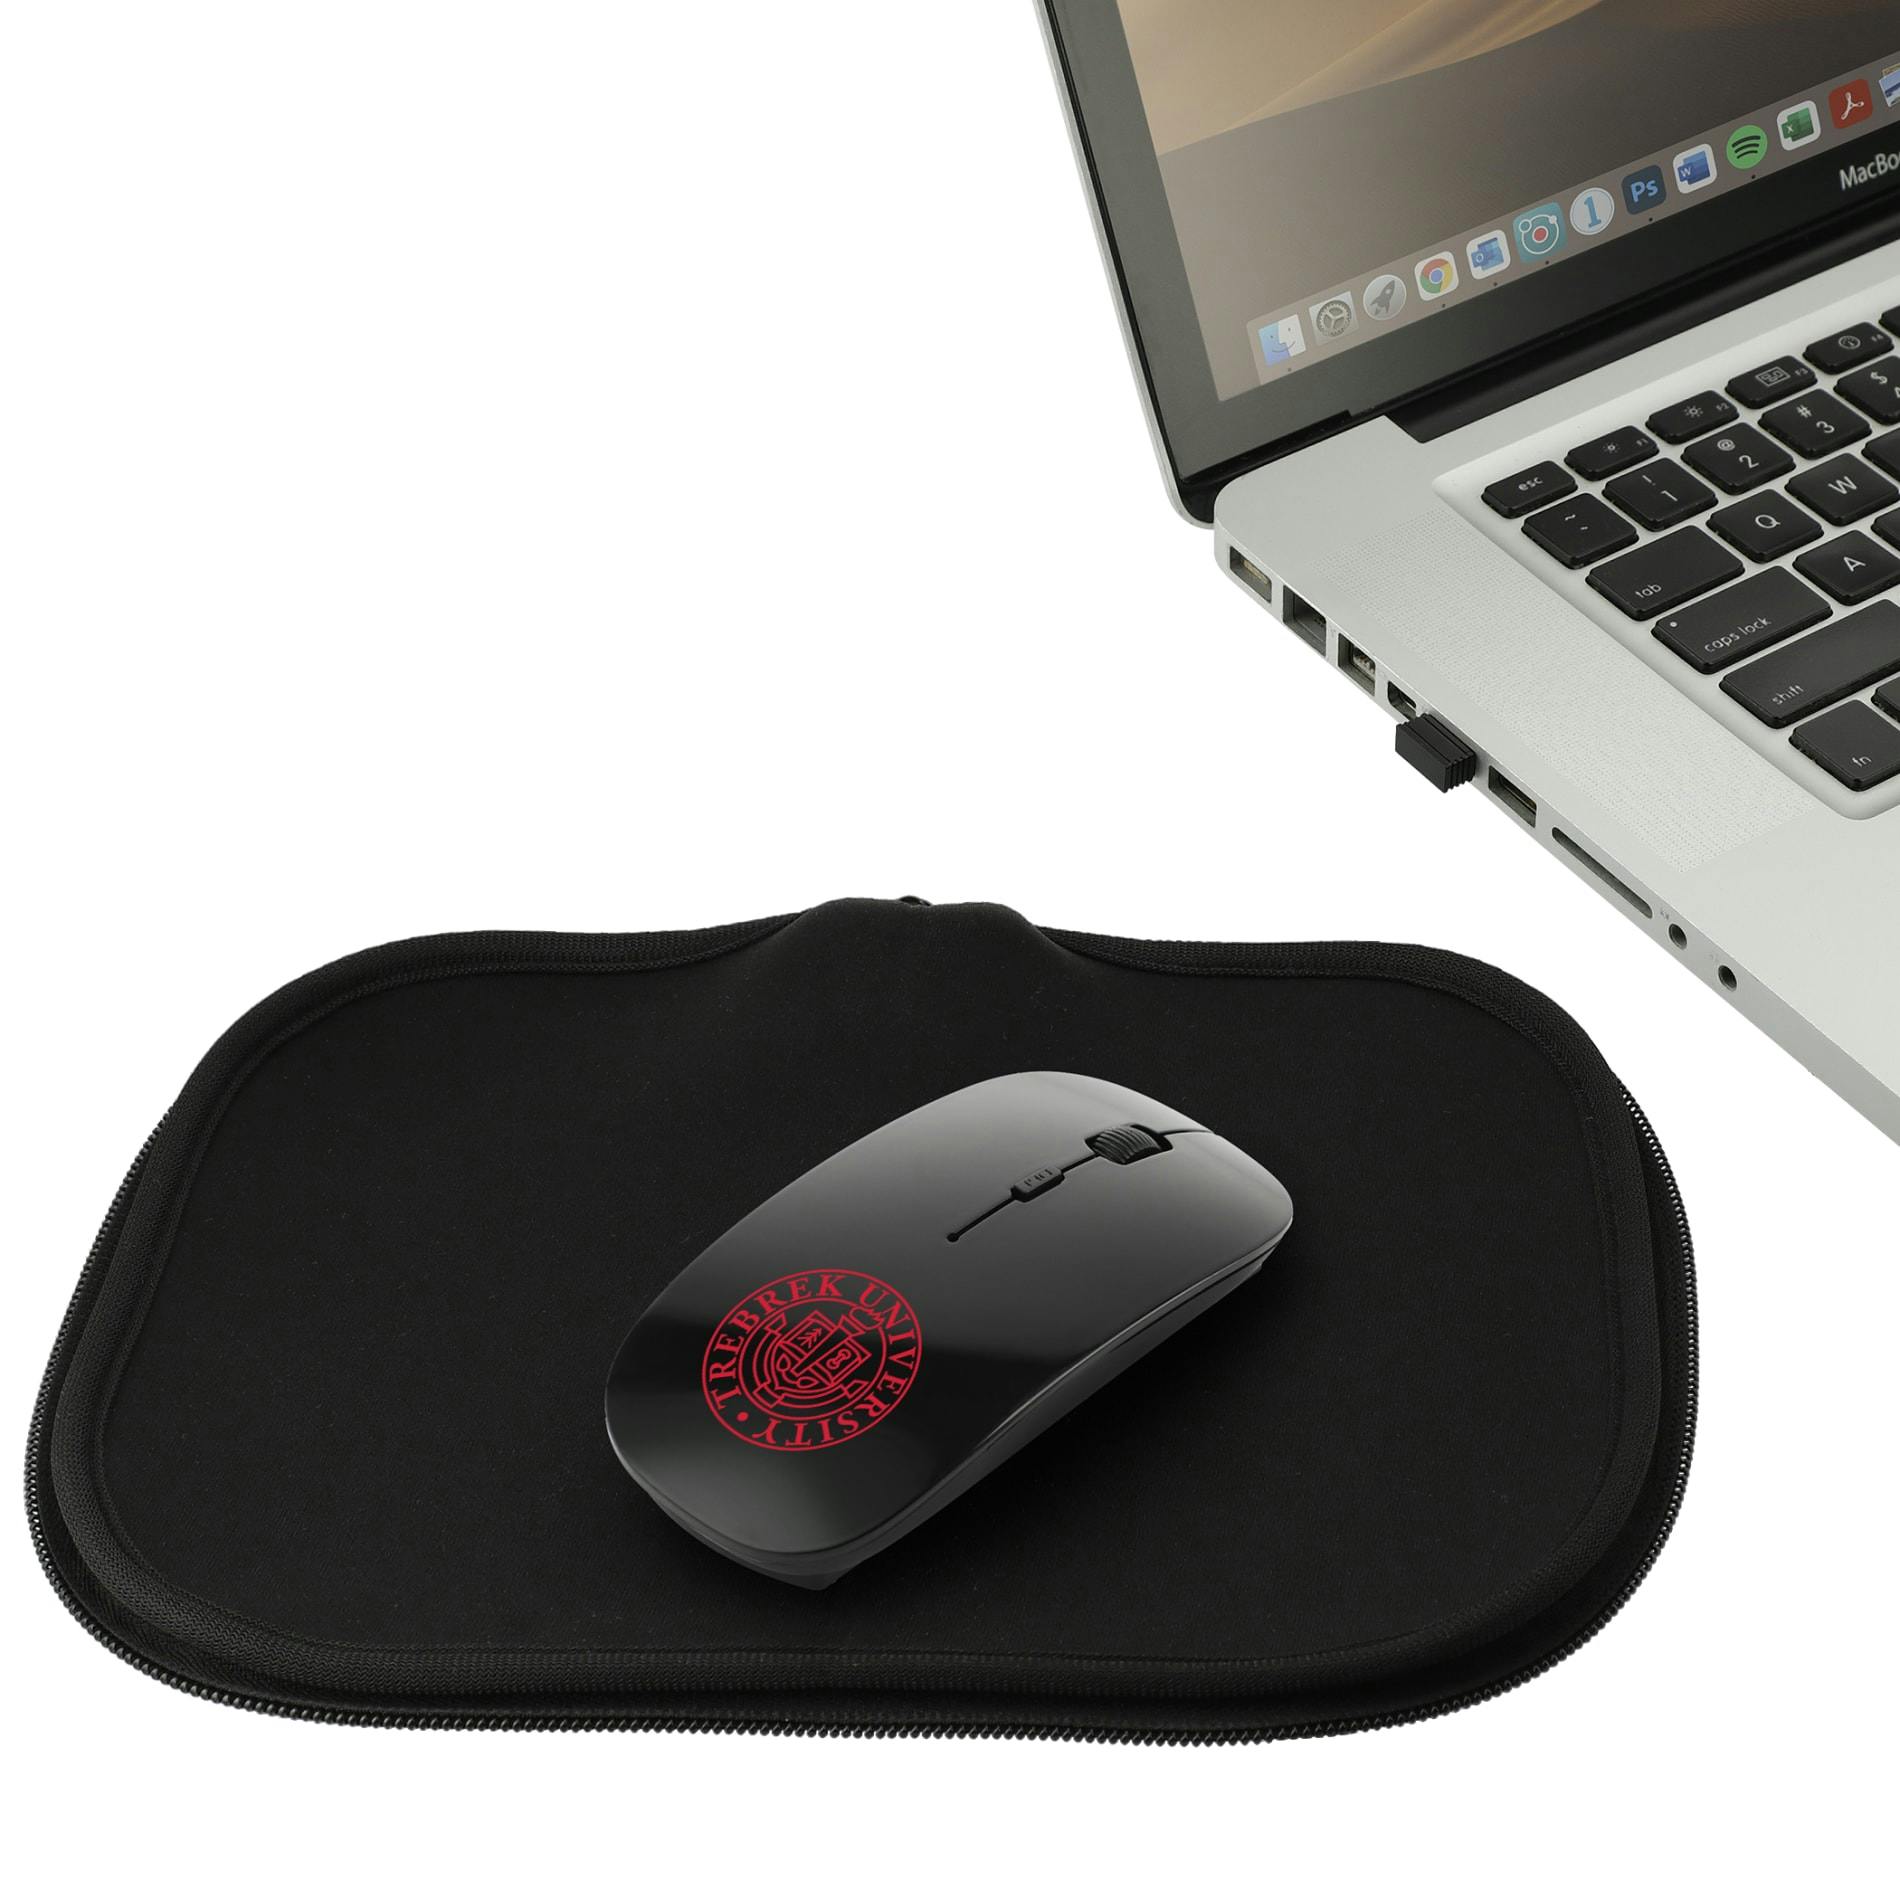 Accel Portable Wireless Mouse and Pad - additional Image 3